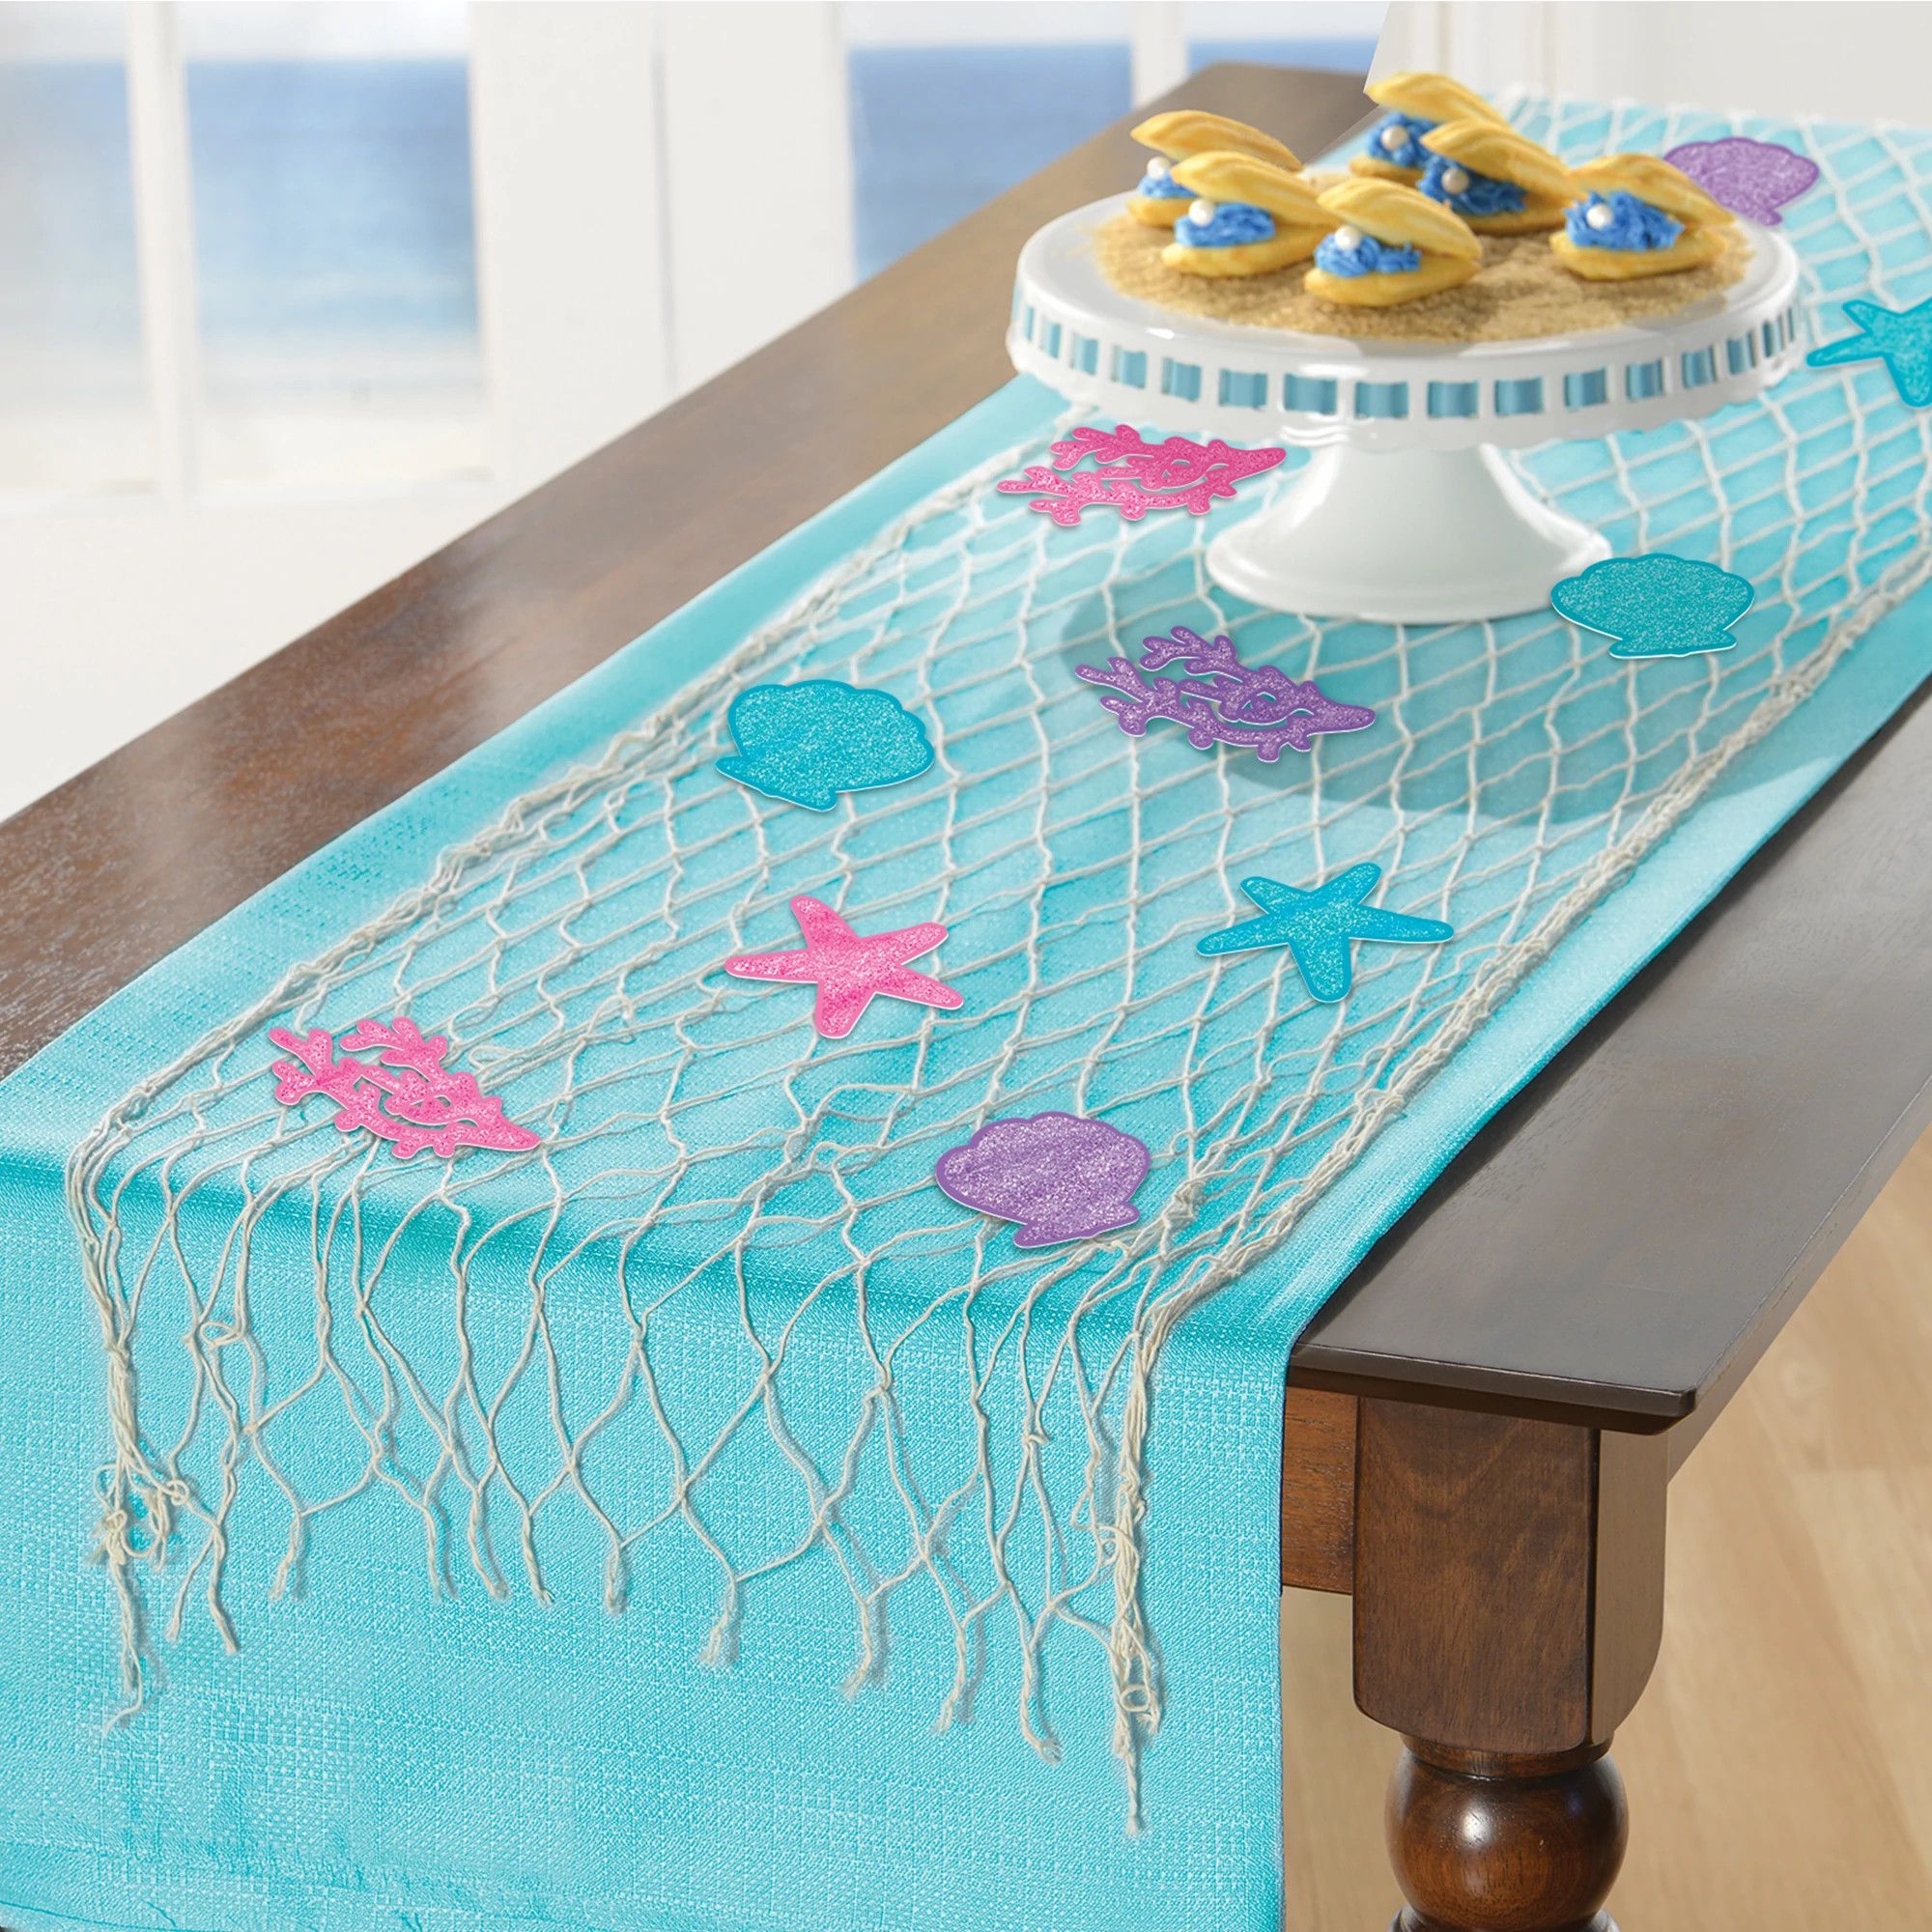 Shimmering Mermaids Fish Net Decoration Kit - Party Makers